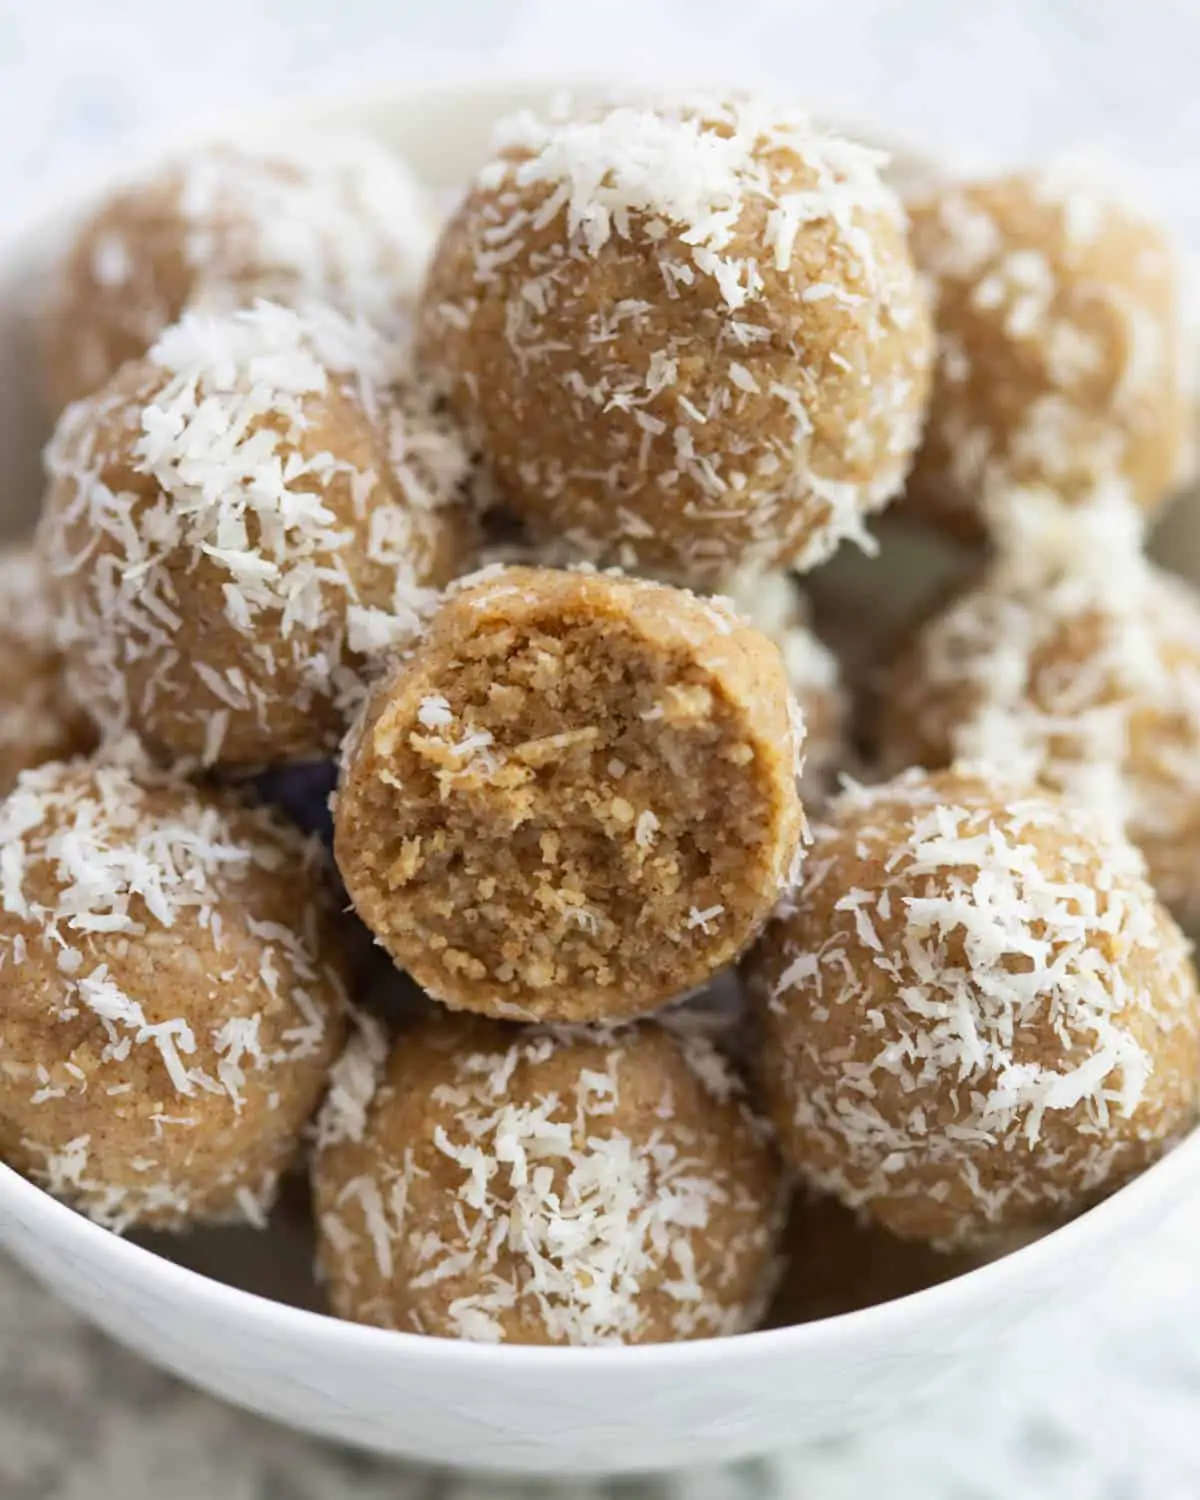 Coconut bliss balls, an easy vegan picnic idea for a snack.
